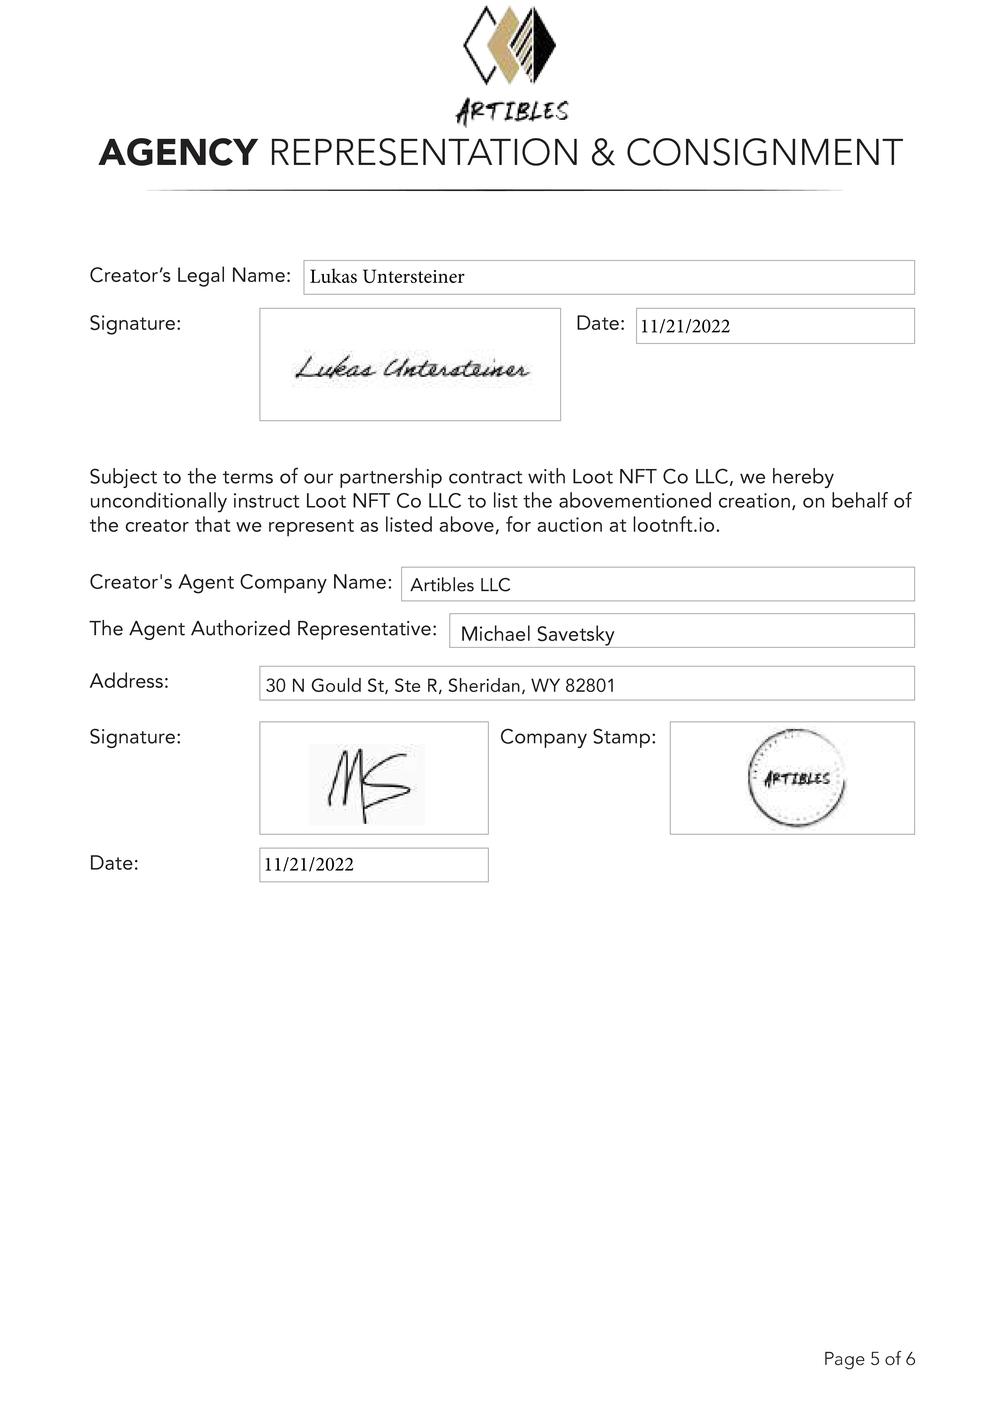 Certificate of Authenticity and Consignment - Cave.pdf